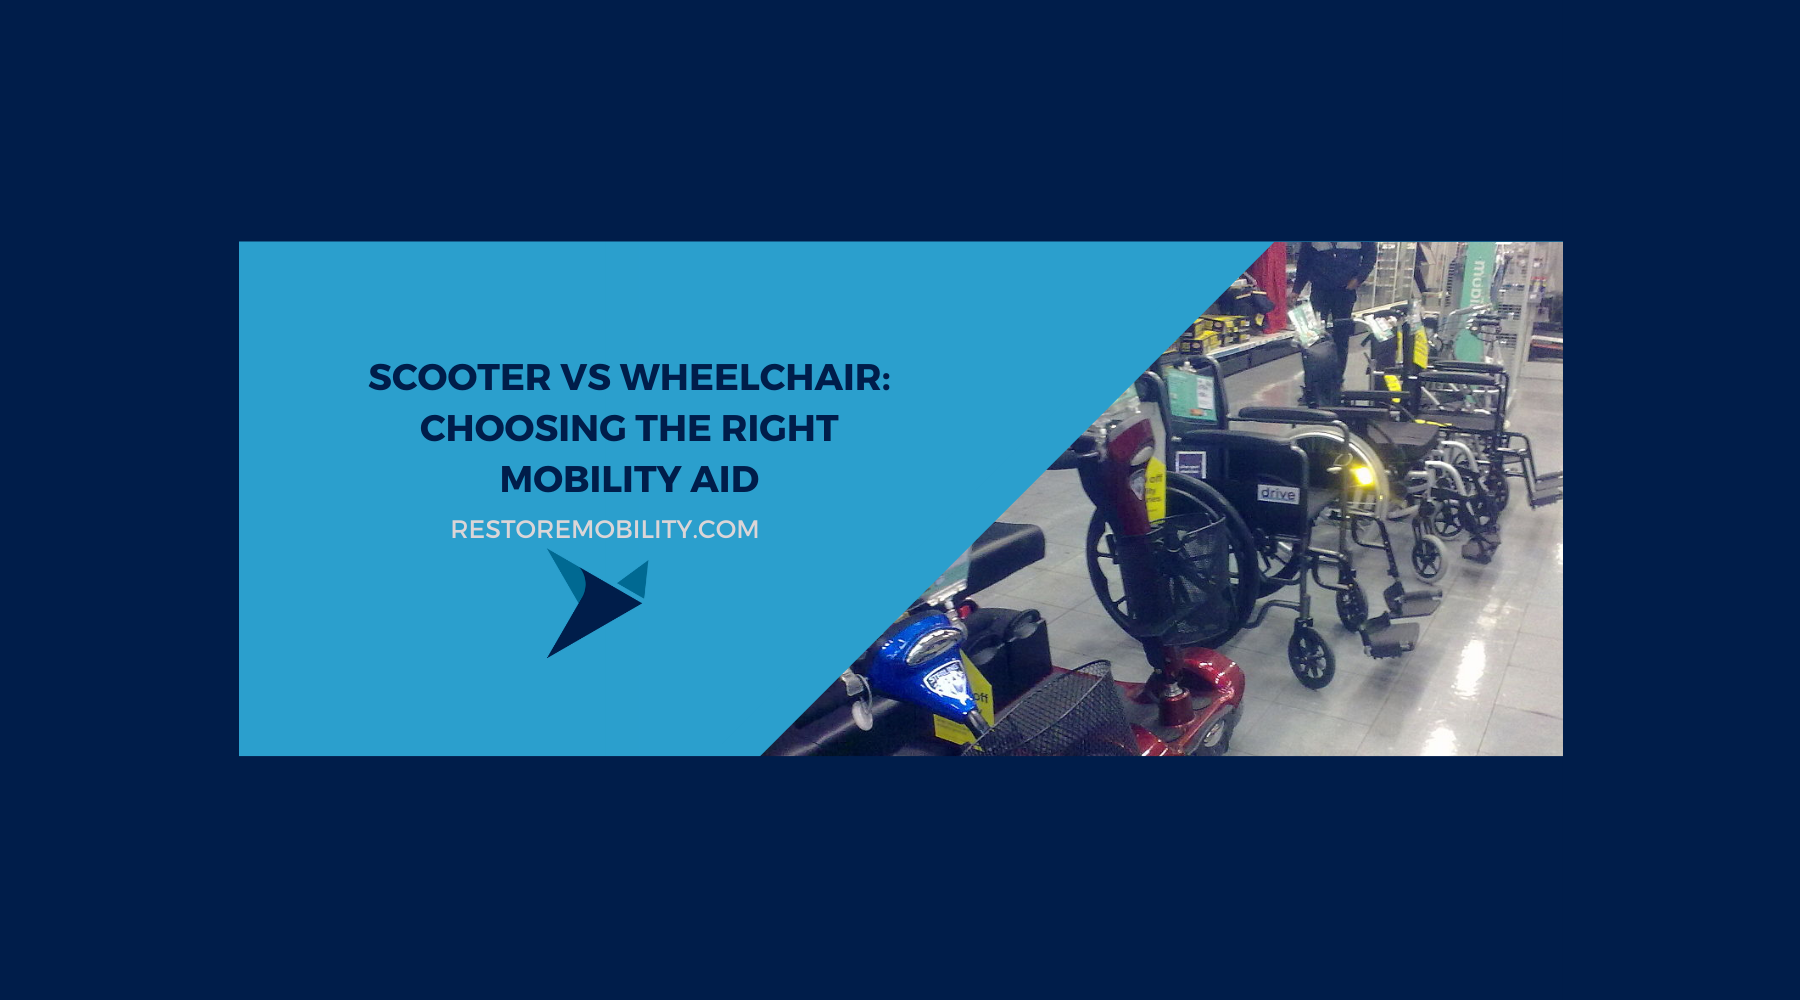 Scooter vs Wheelchair: Choosing the Right Mobility Aid